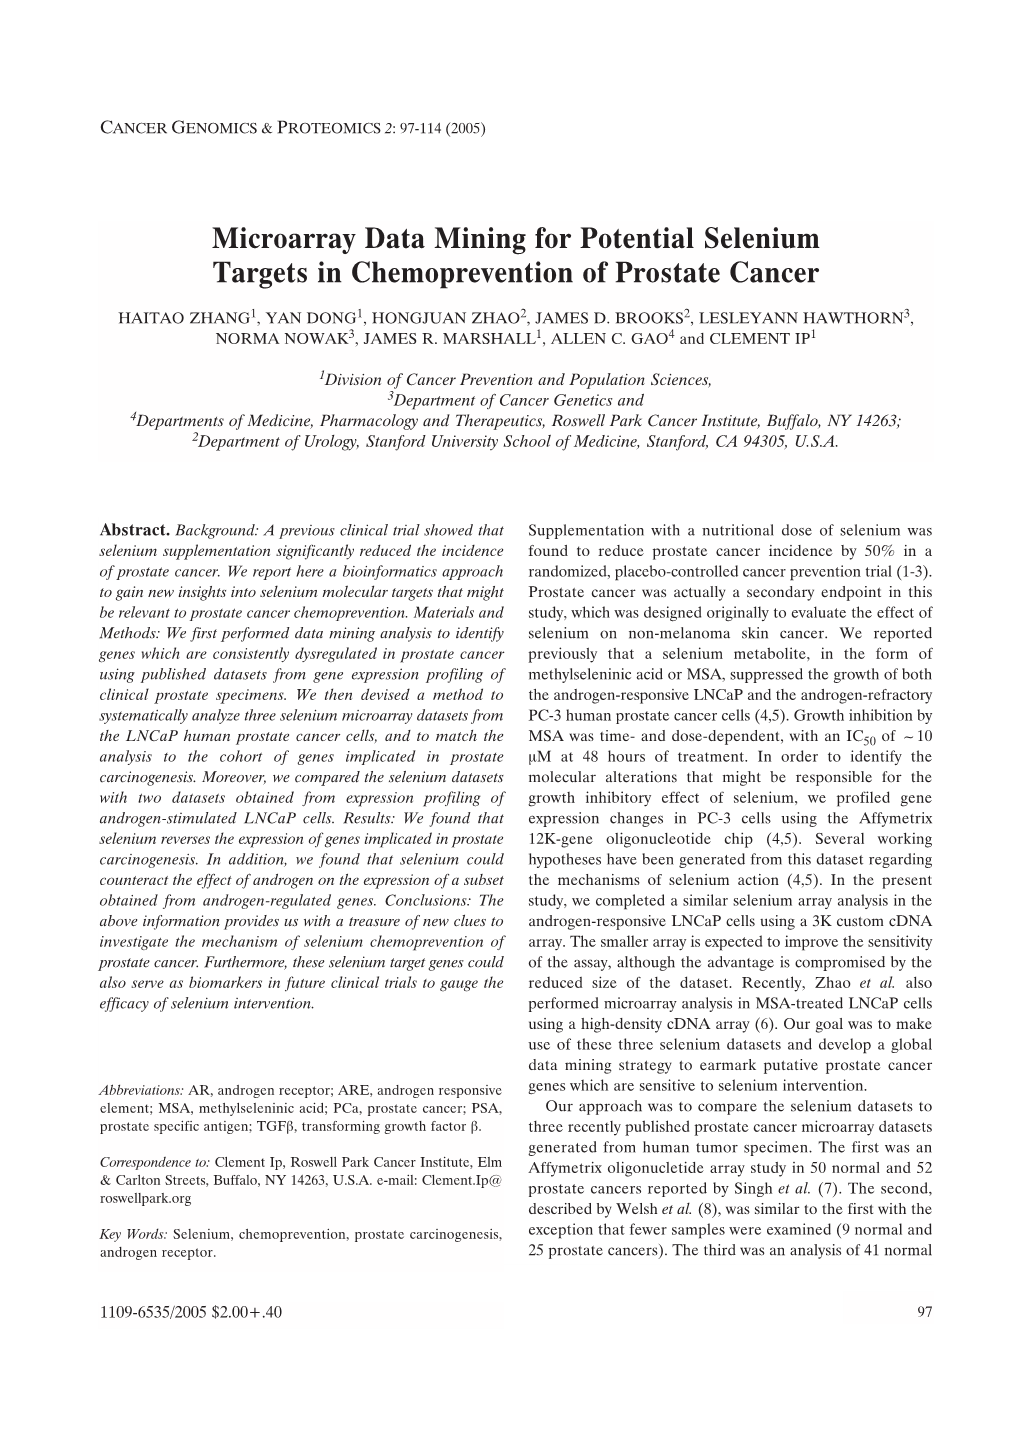 Microarray Data Mining for Potential Selenium Targets in Chemoprevention of Prostate Cancer